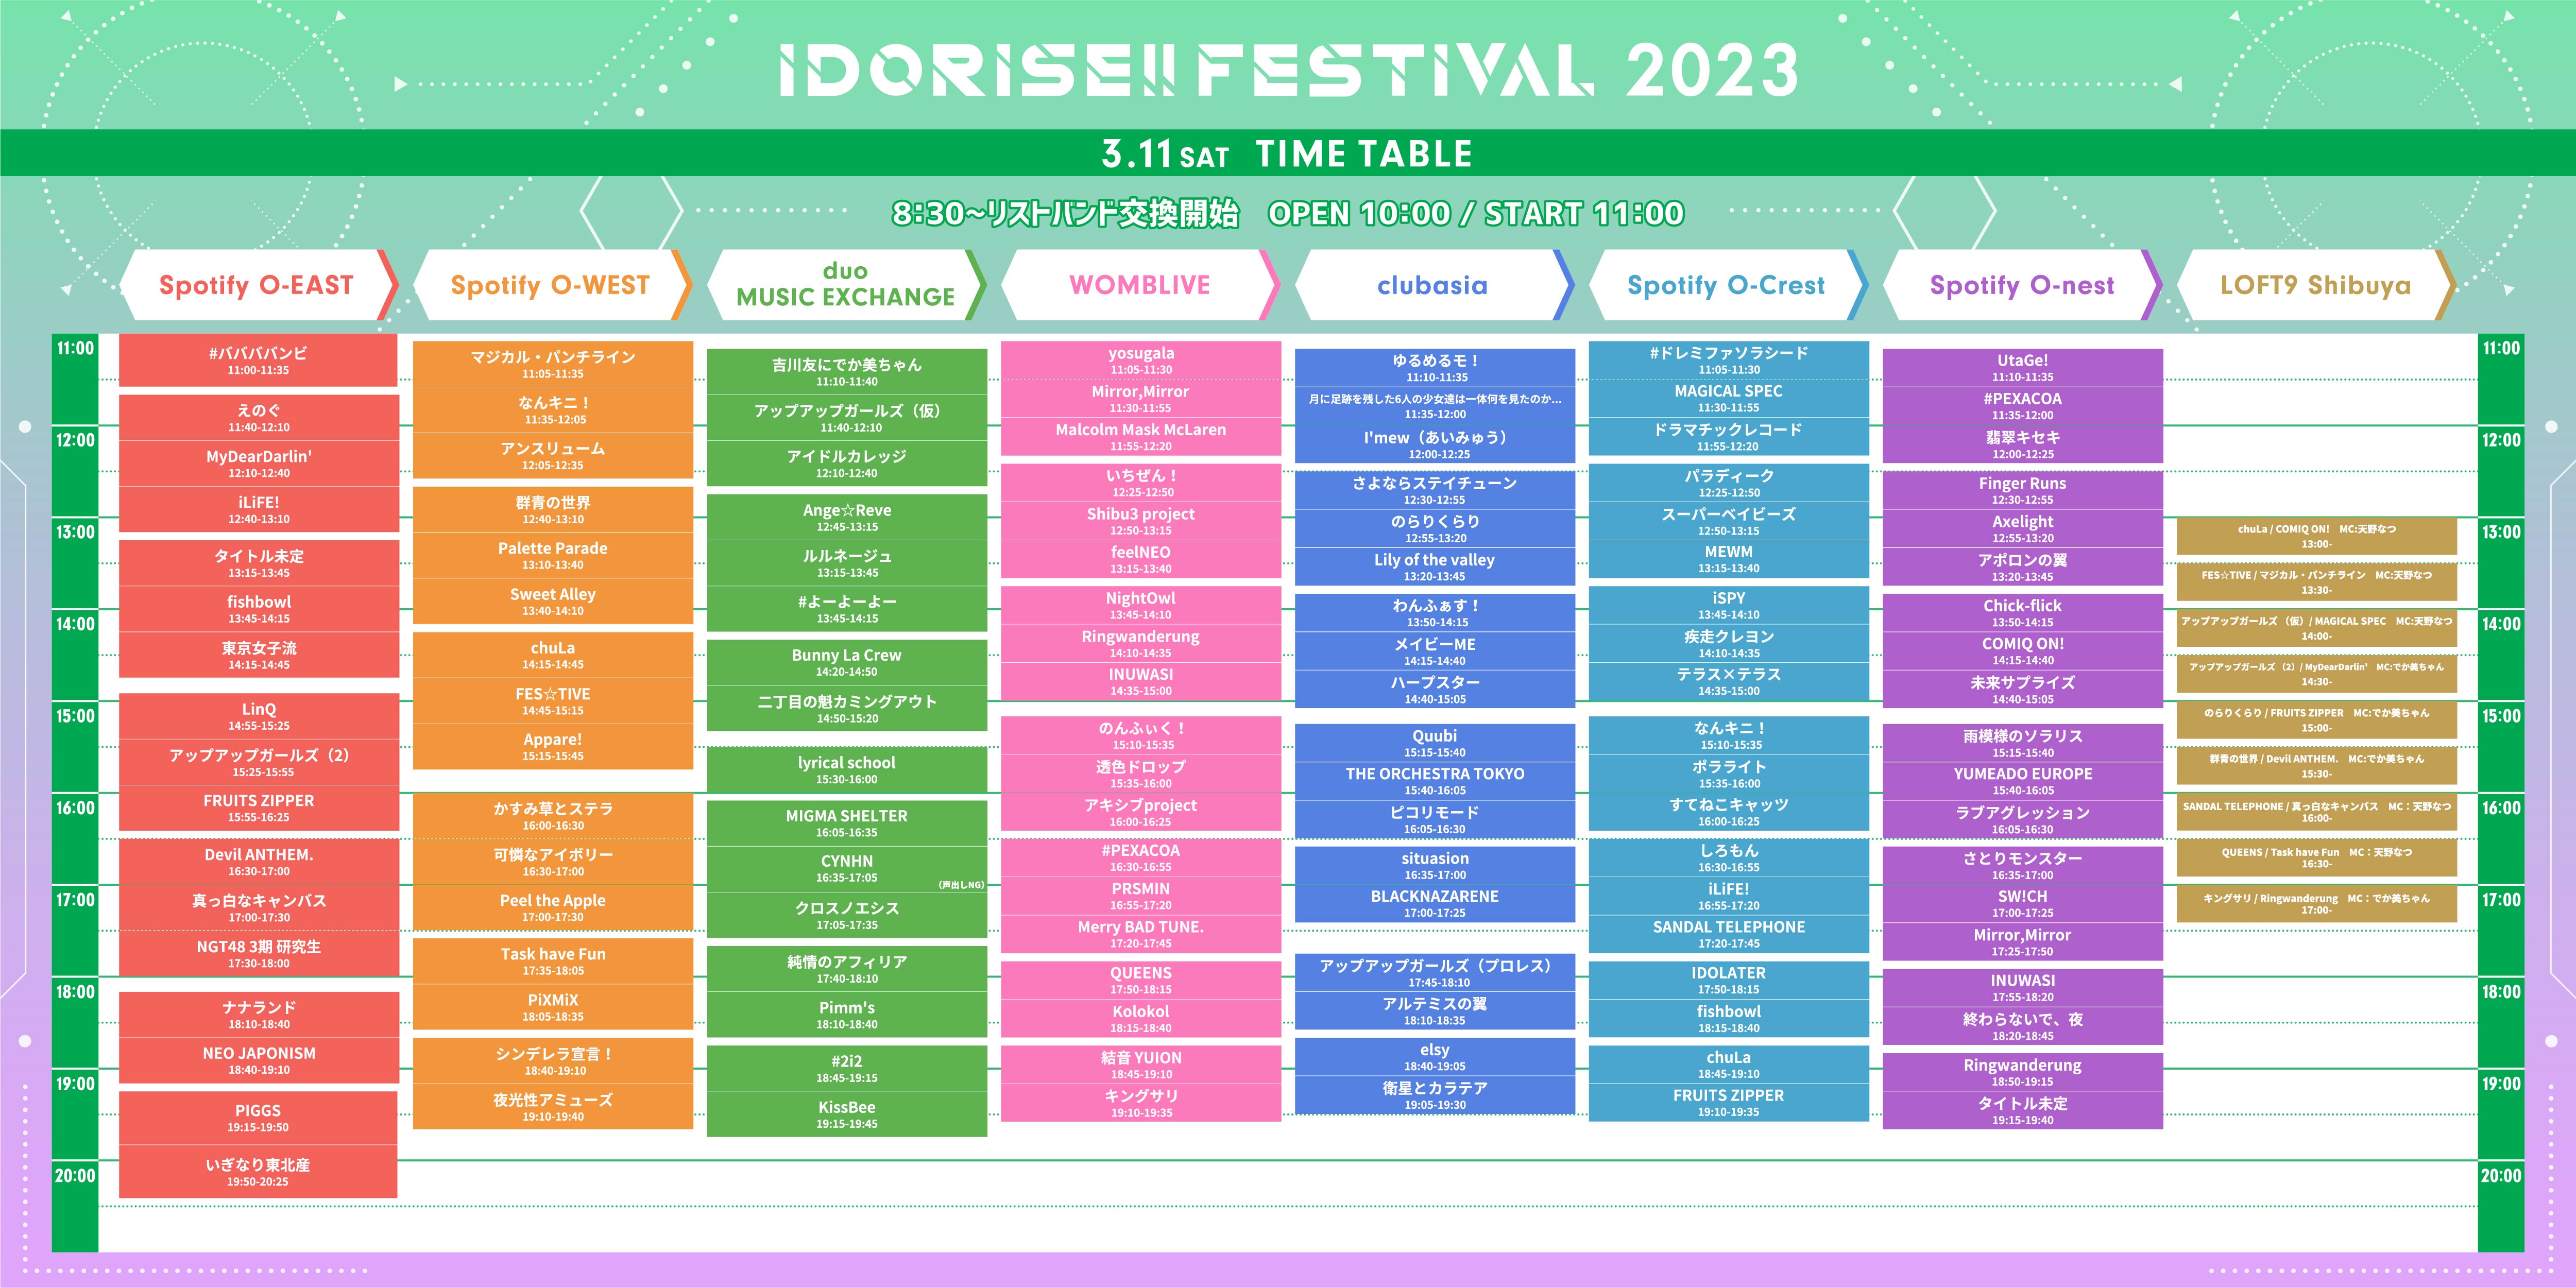 Timetable - Day1